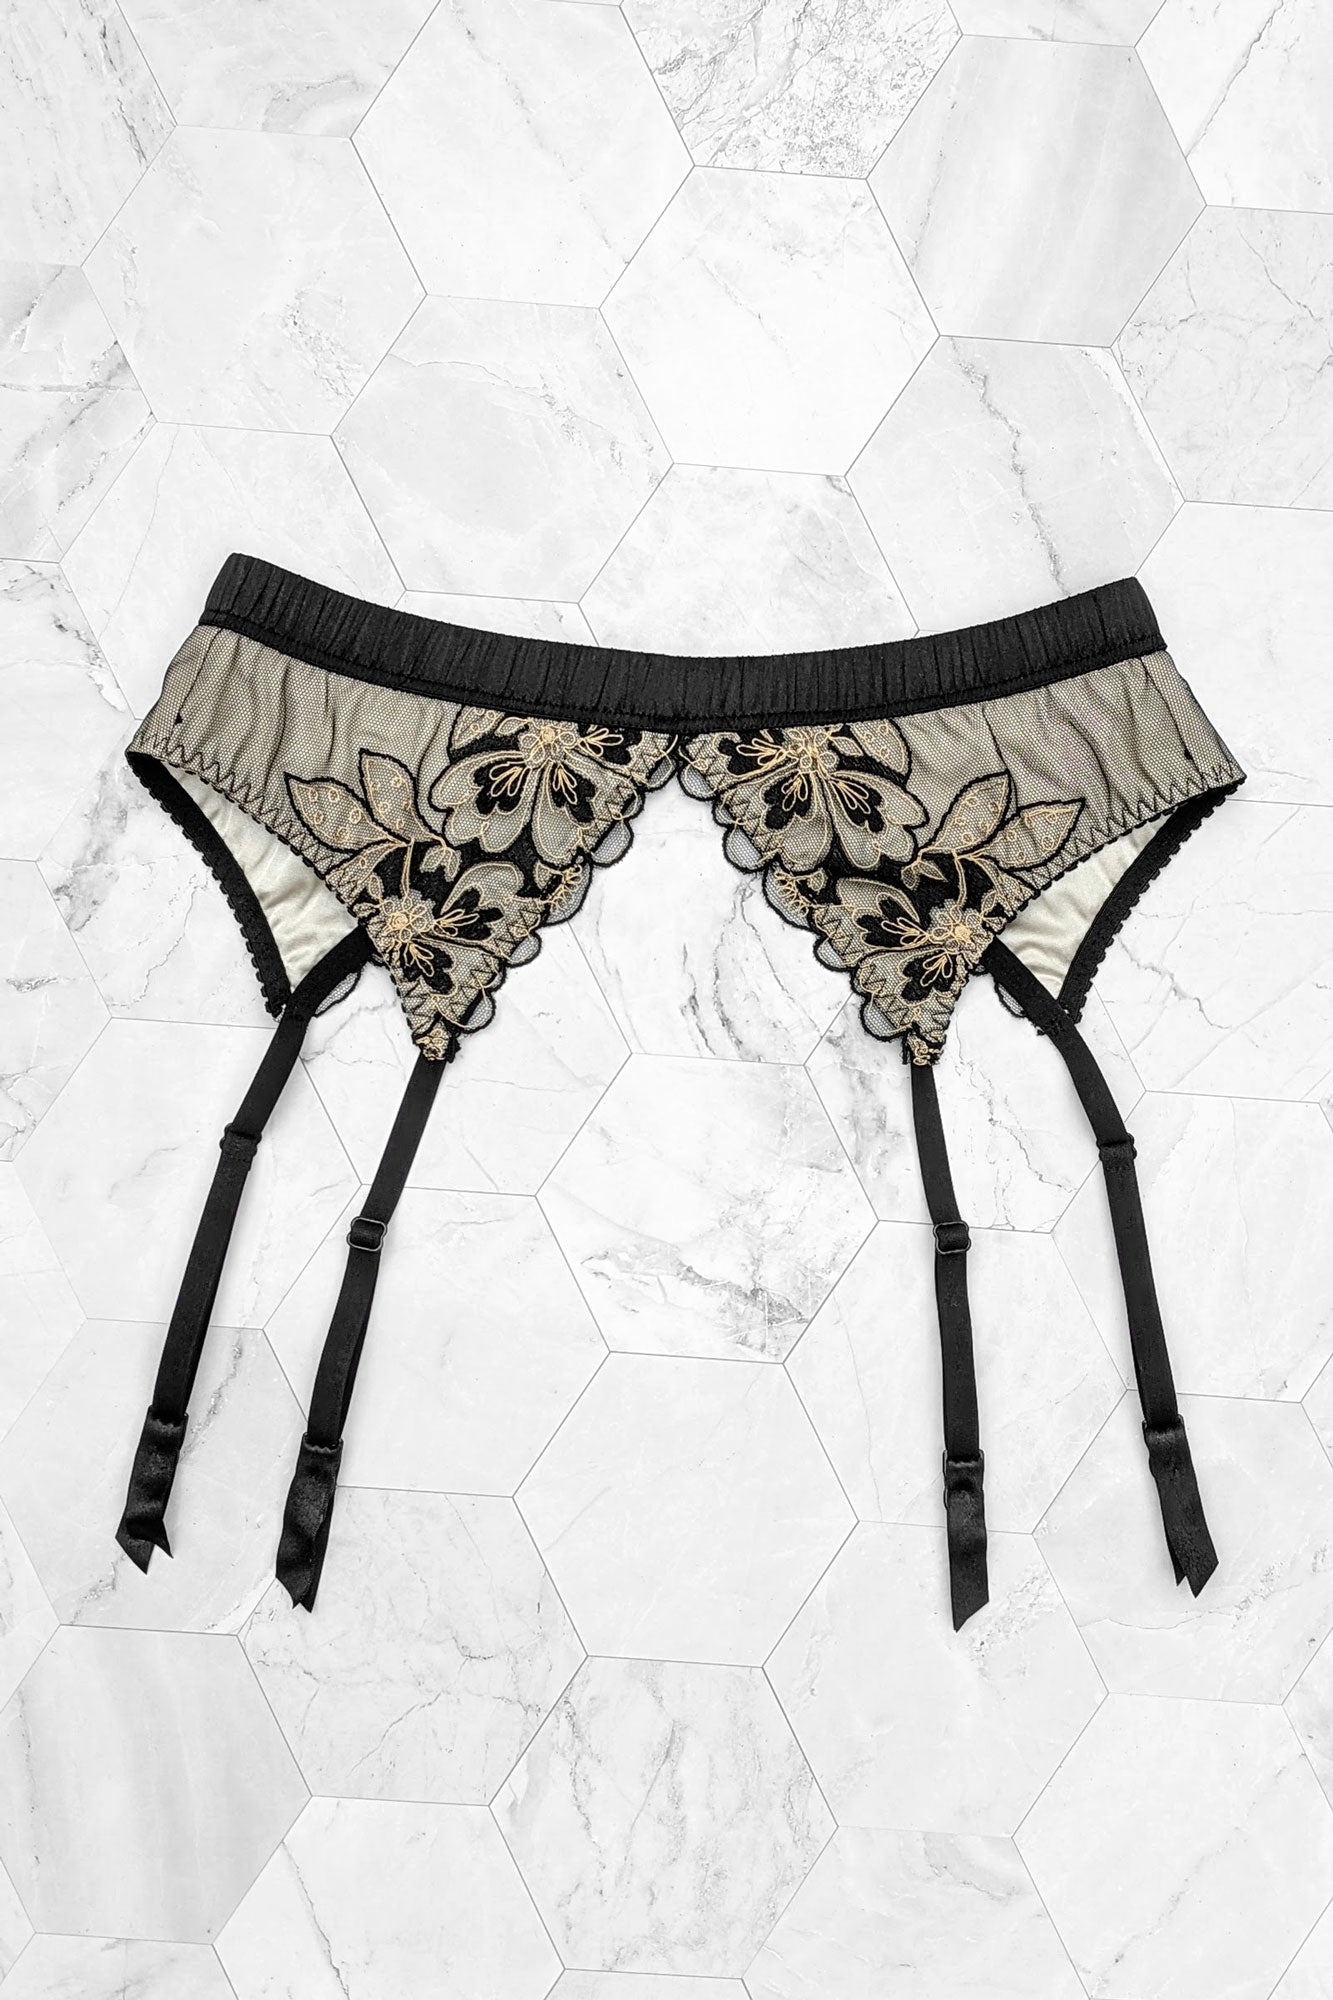 Luxury silk garter belt with black satin and embroidery